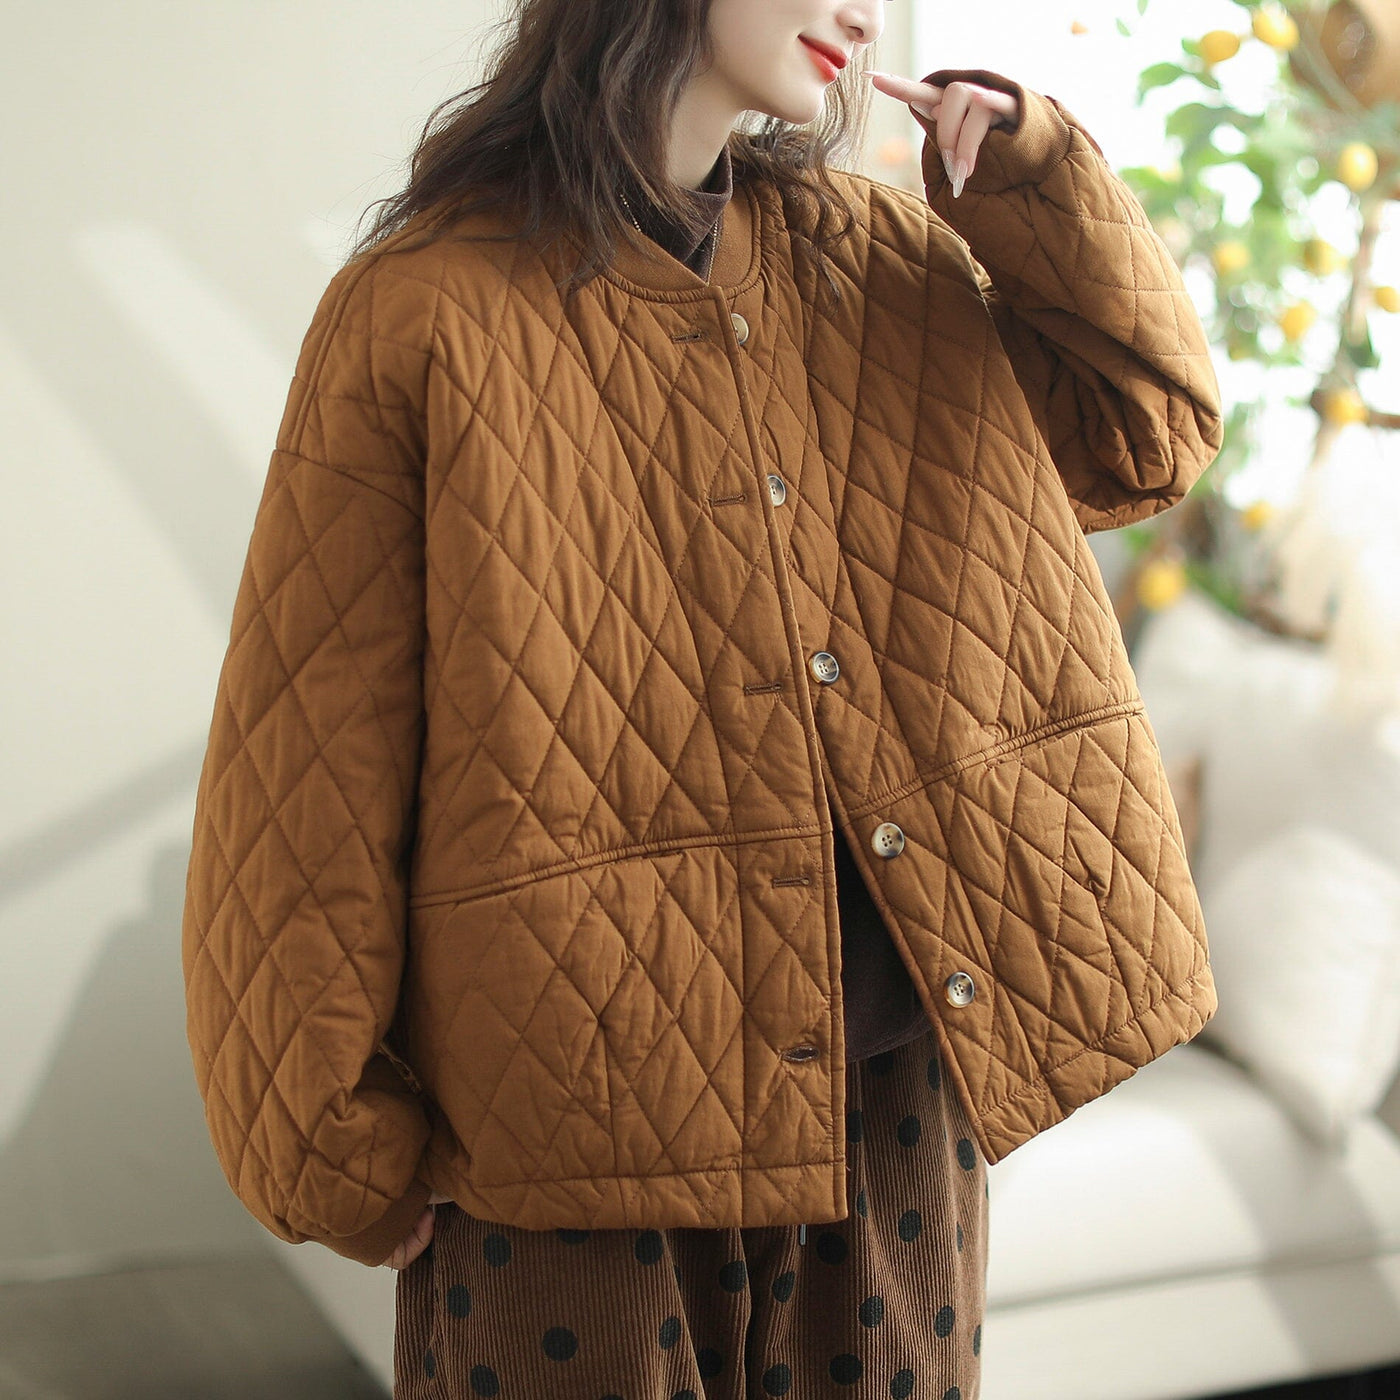 Women Loose Casual Minimalist Cotton Quilted Jacket